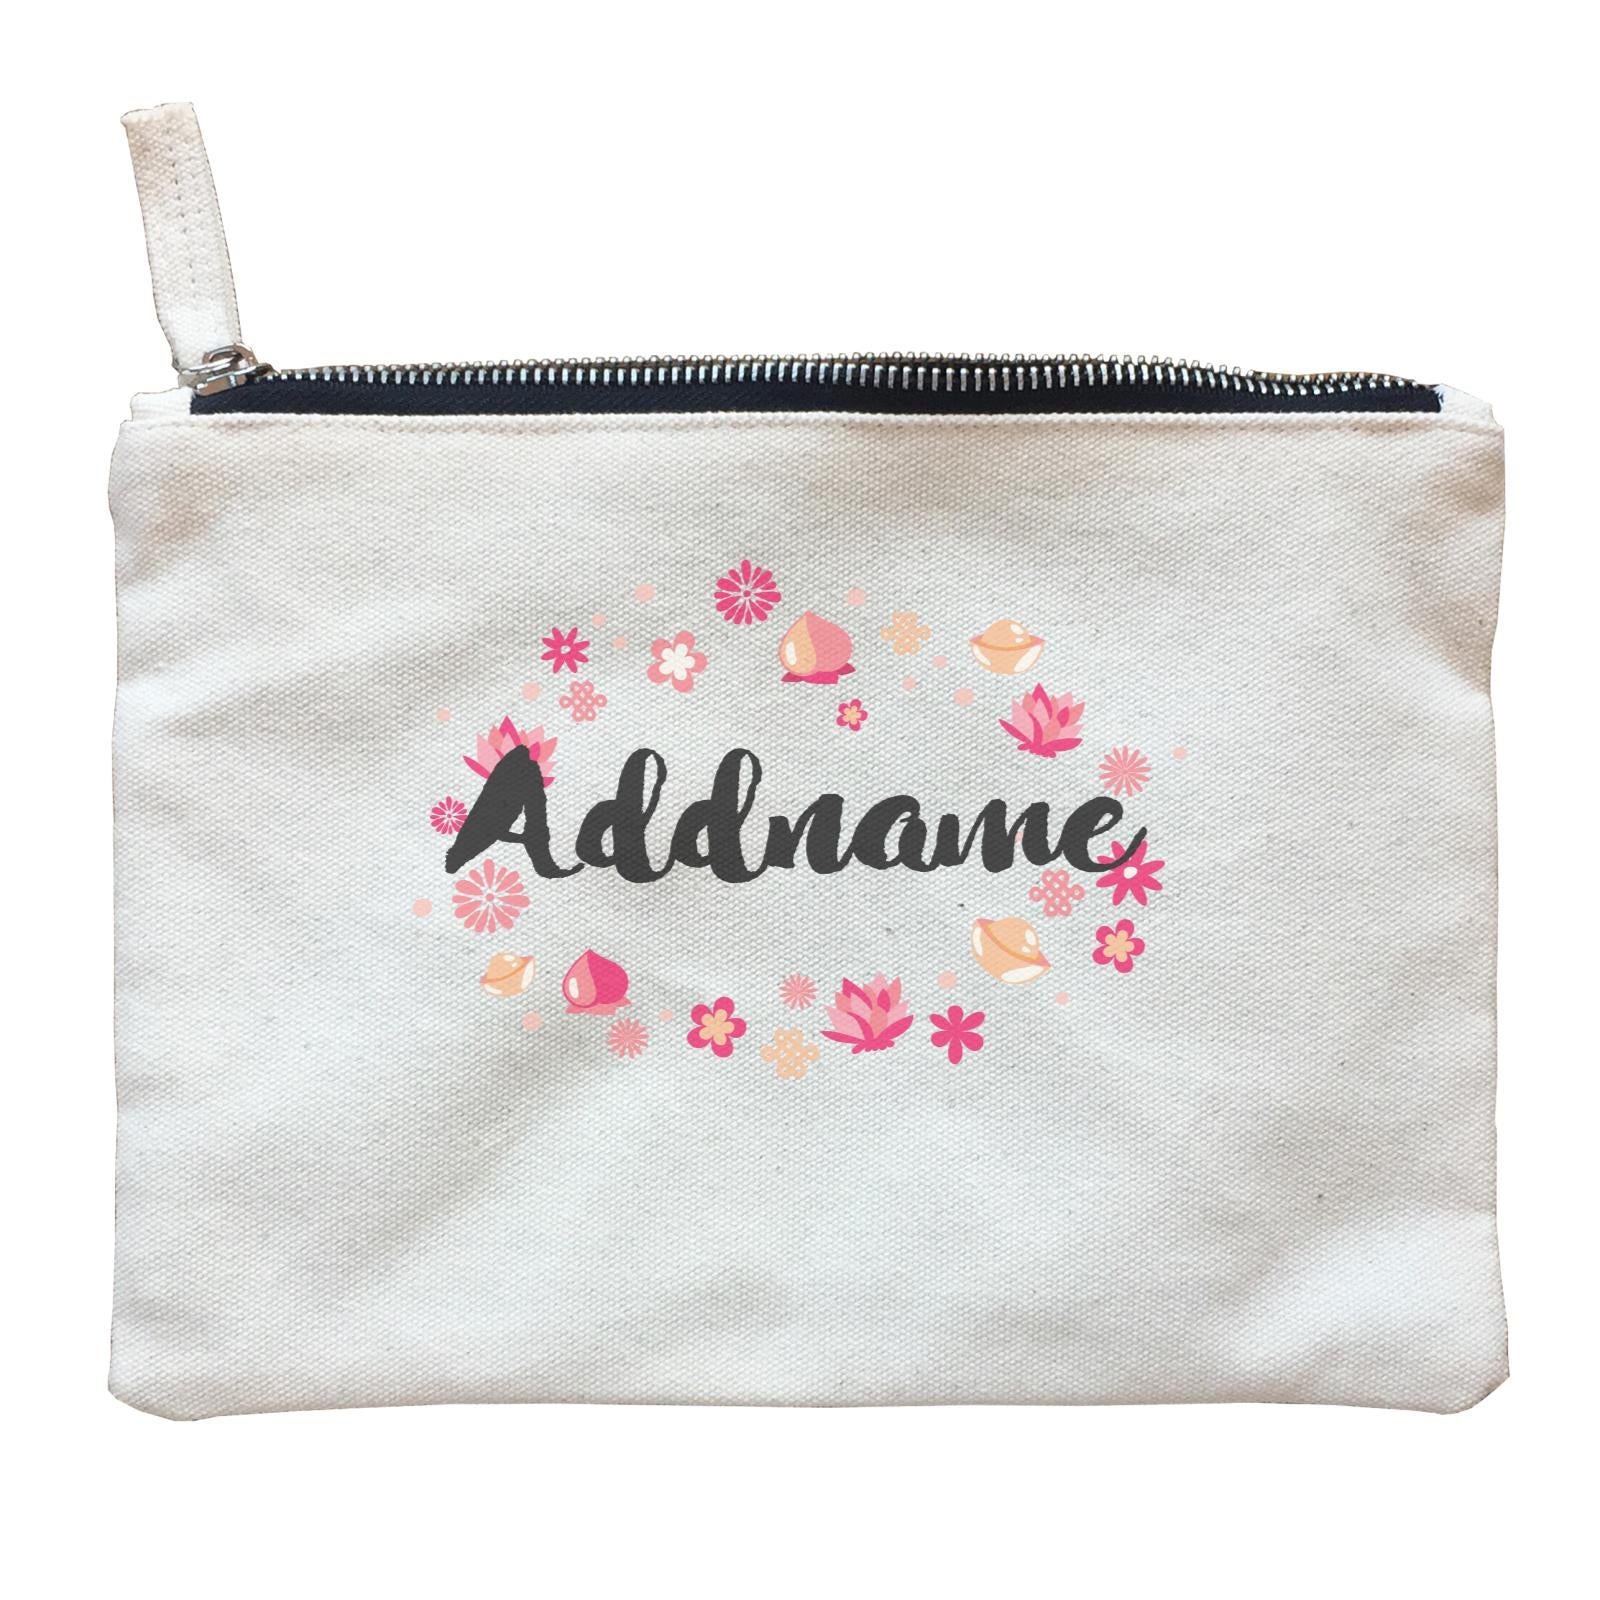 Chinese New Year Addname with Chinese New Year Elements Zipper Pouch